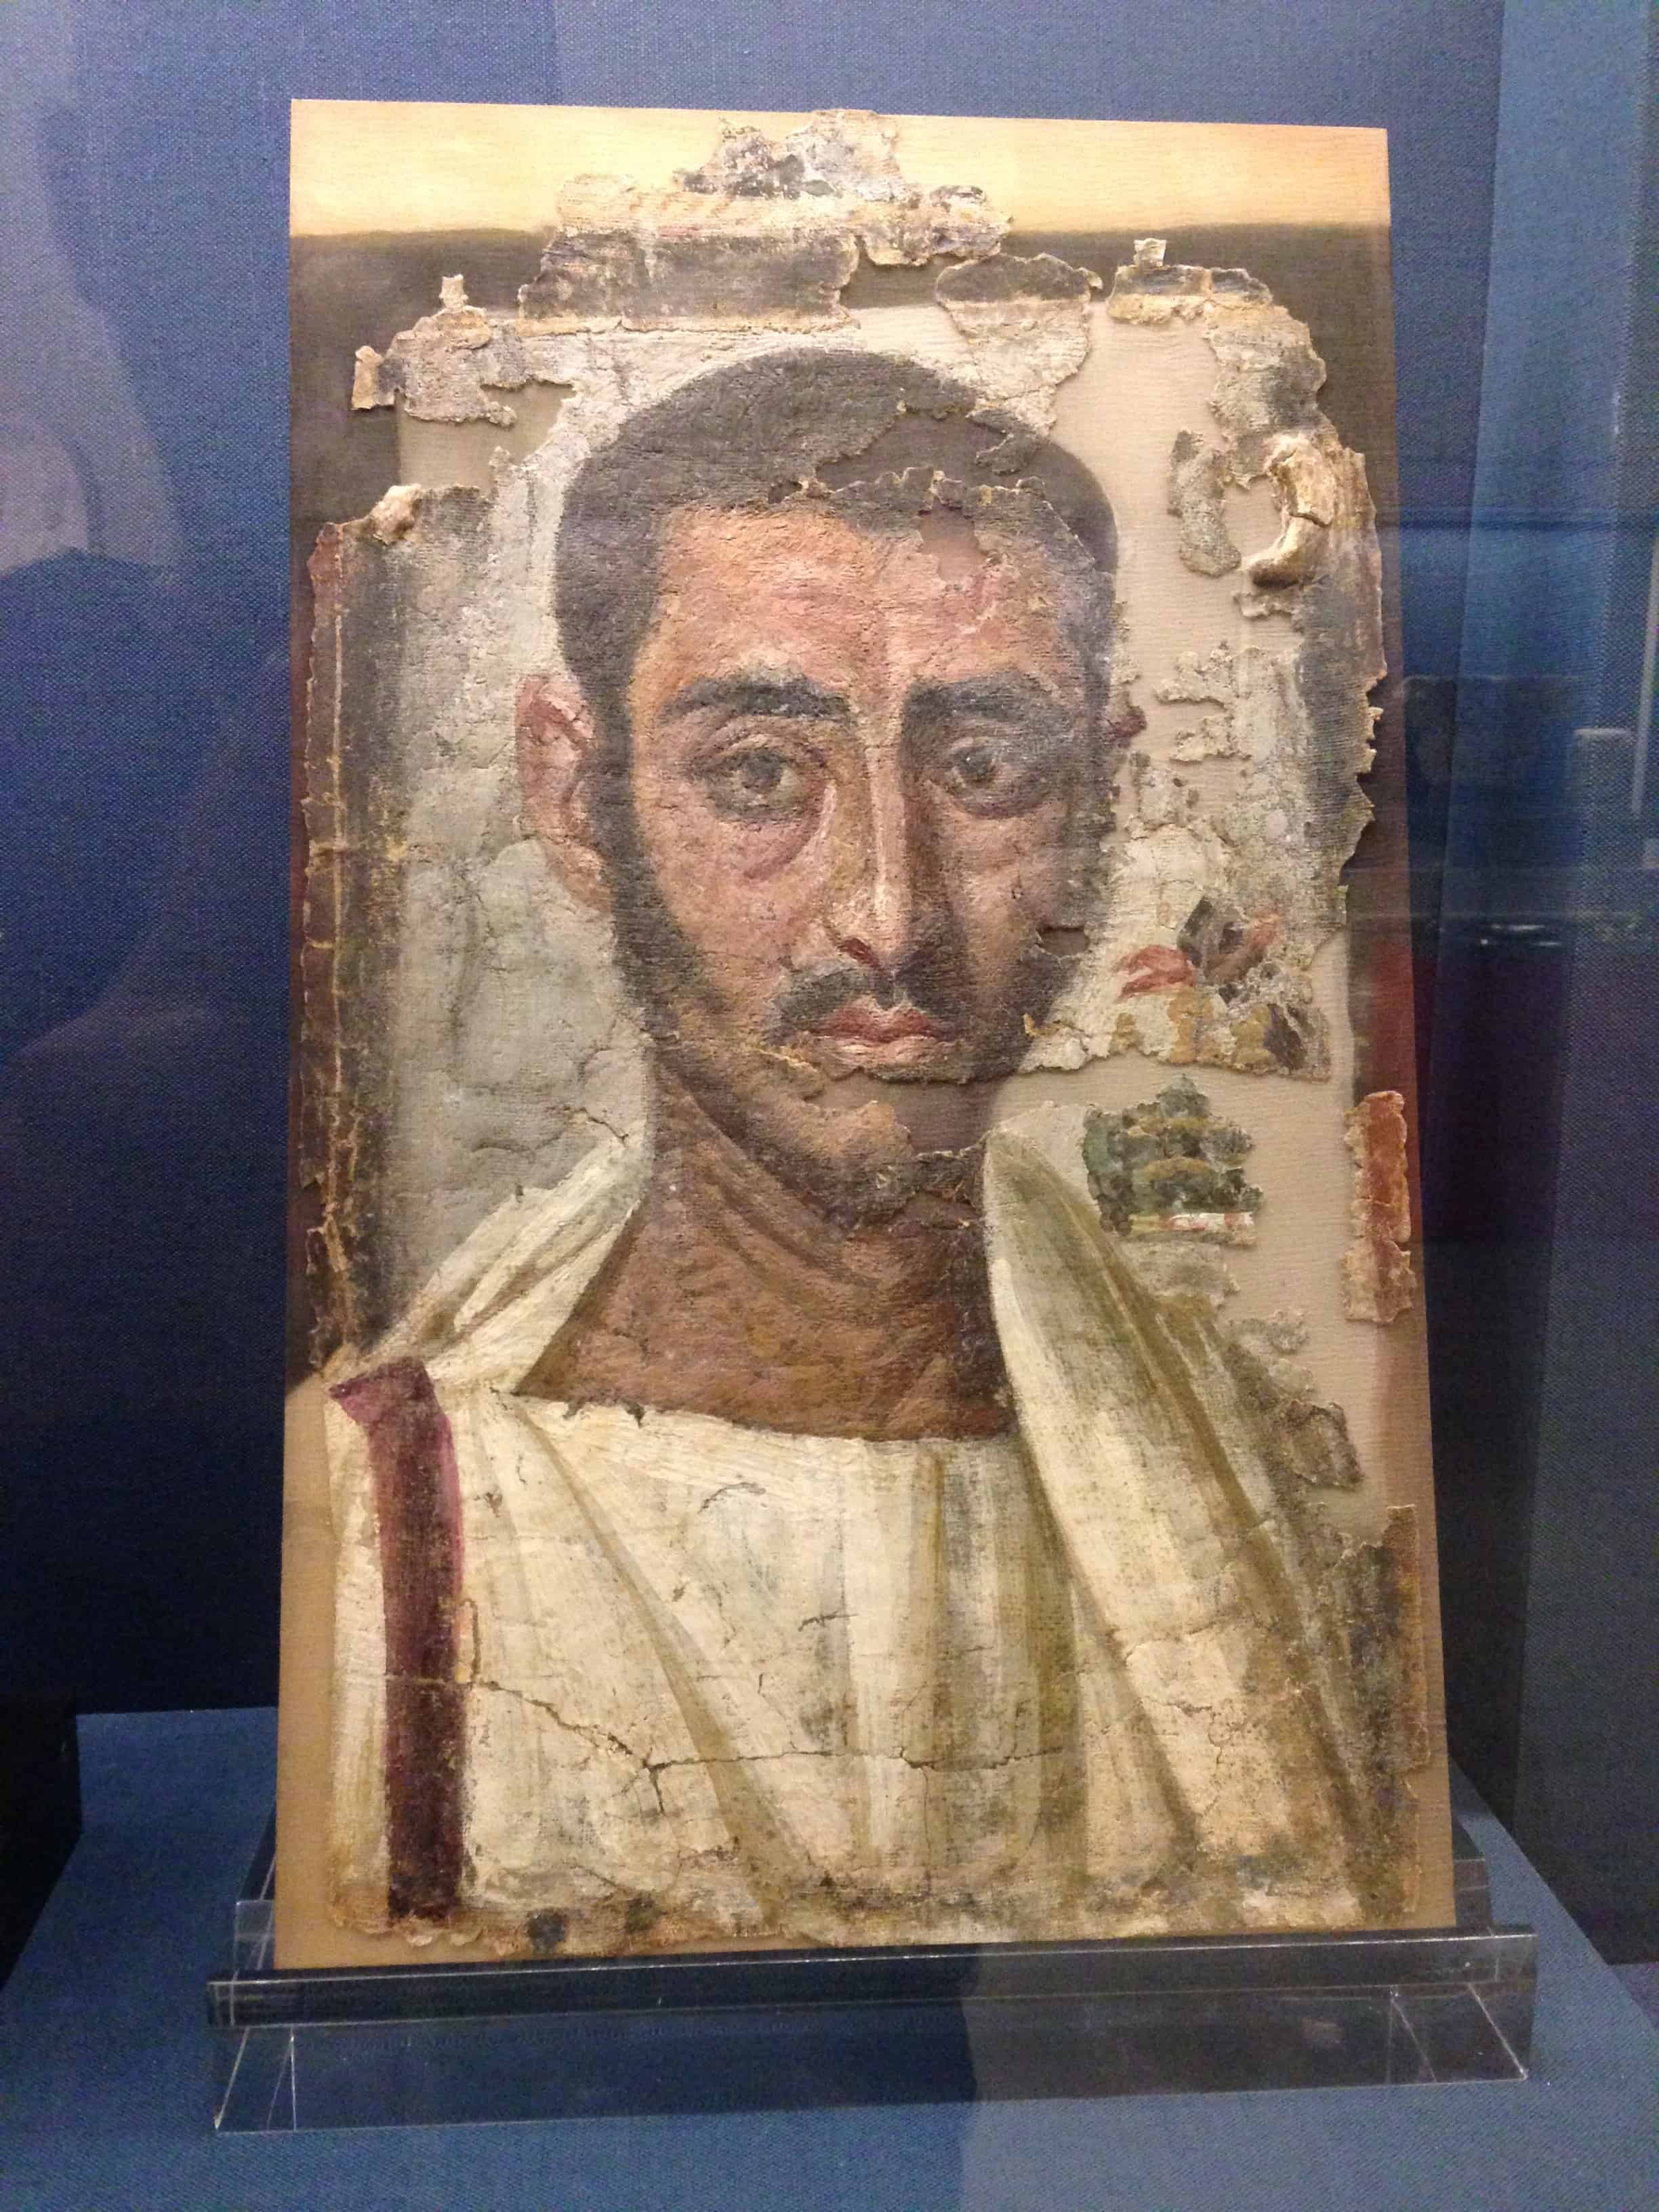 Fayum portrait at the Benaki Museum of Greek Culture in Athens, Greece